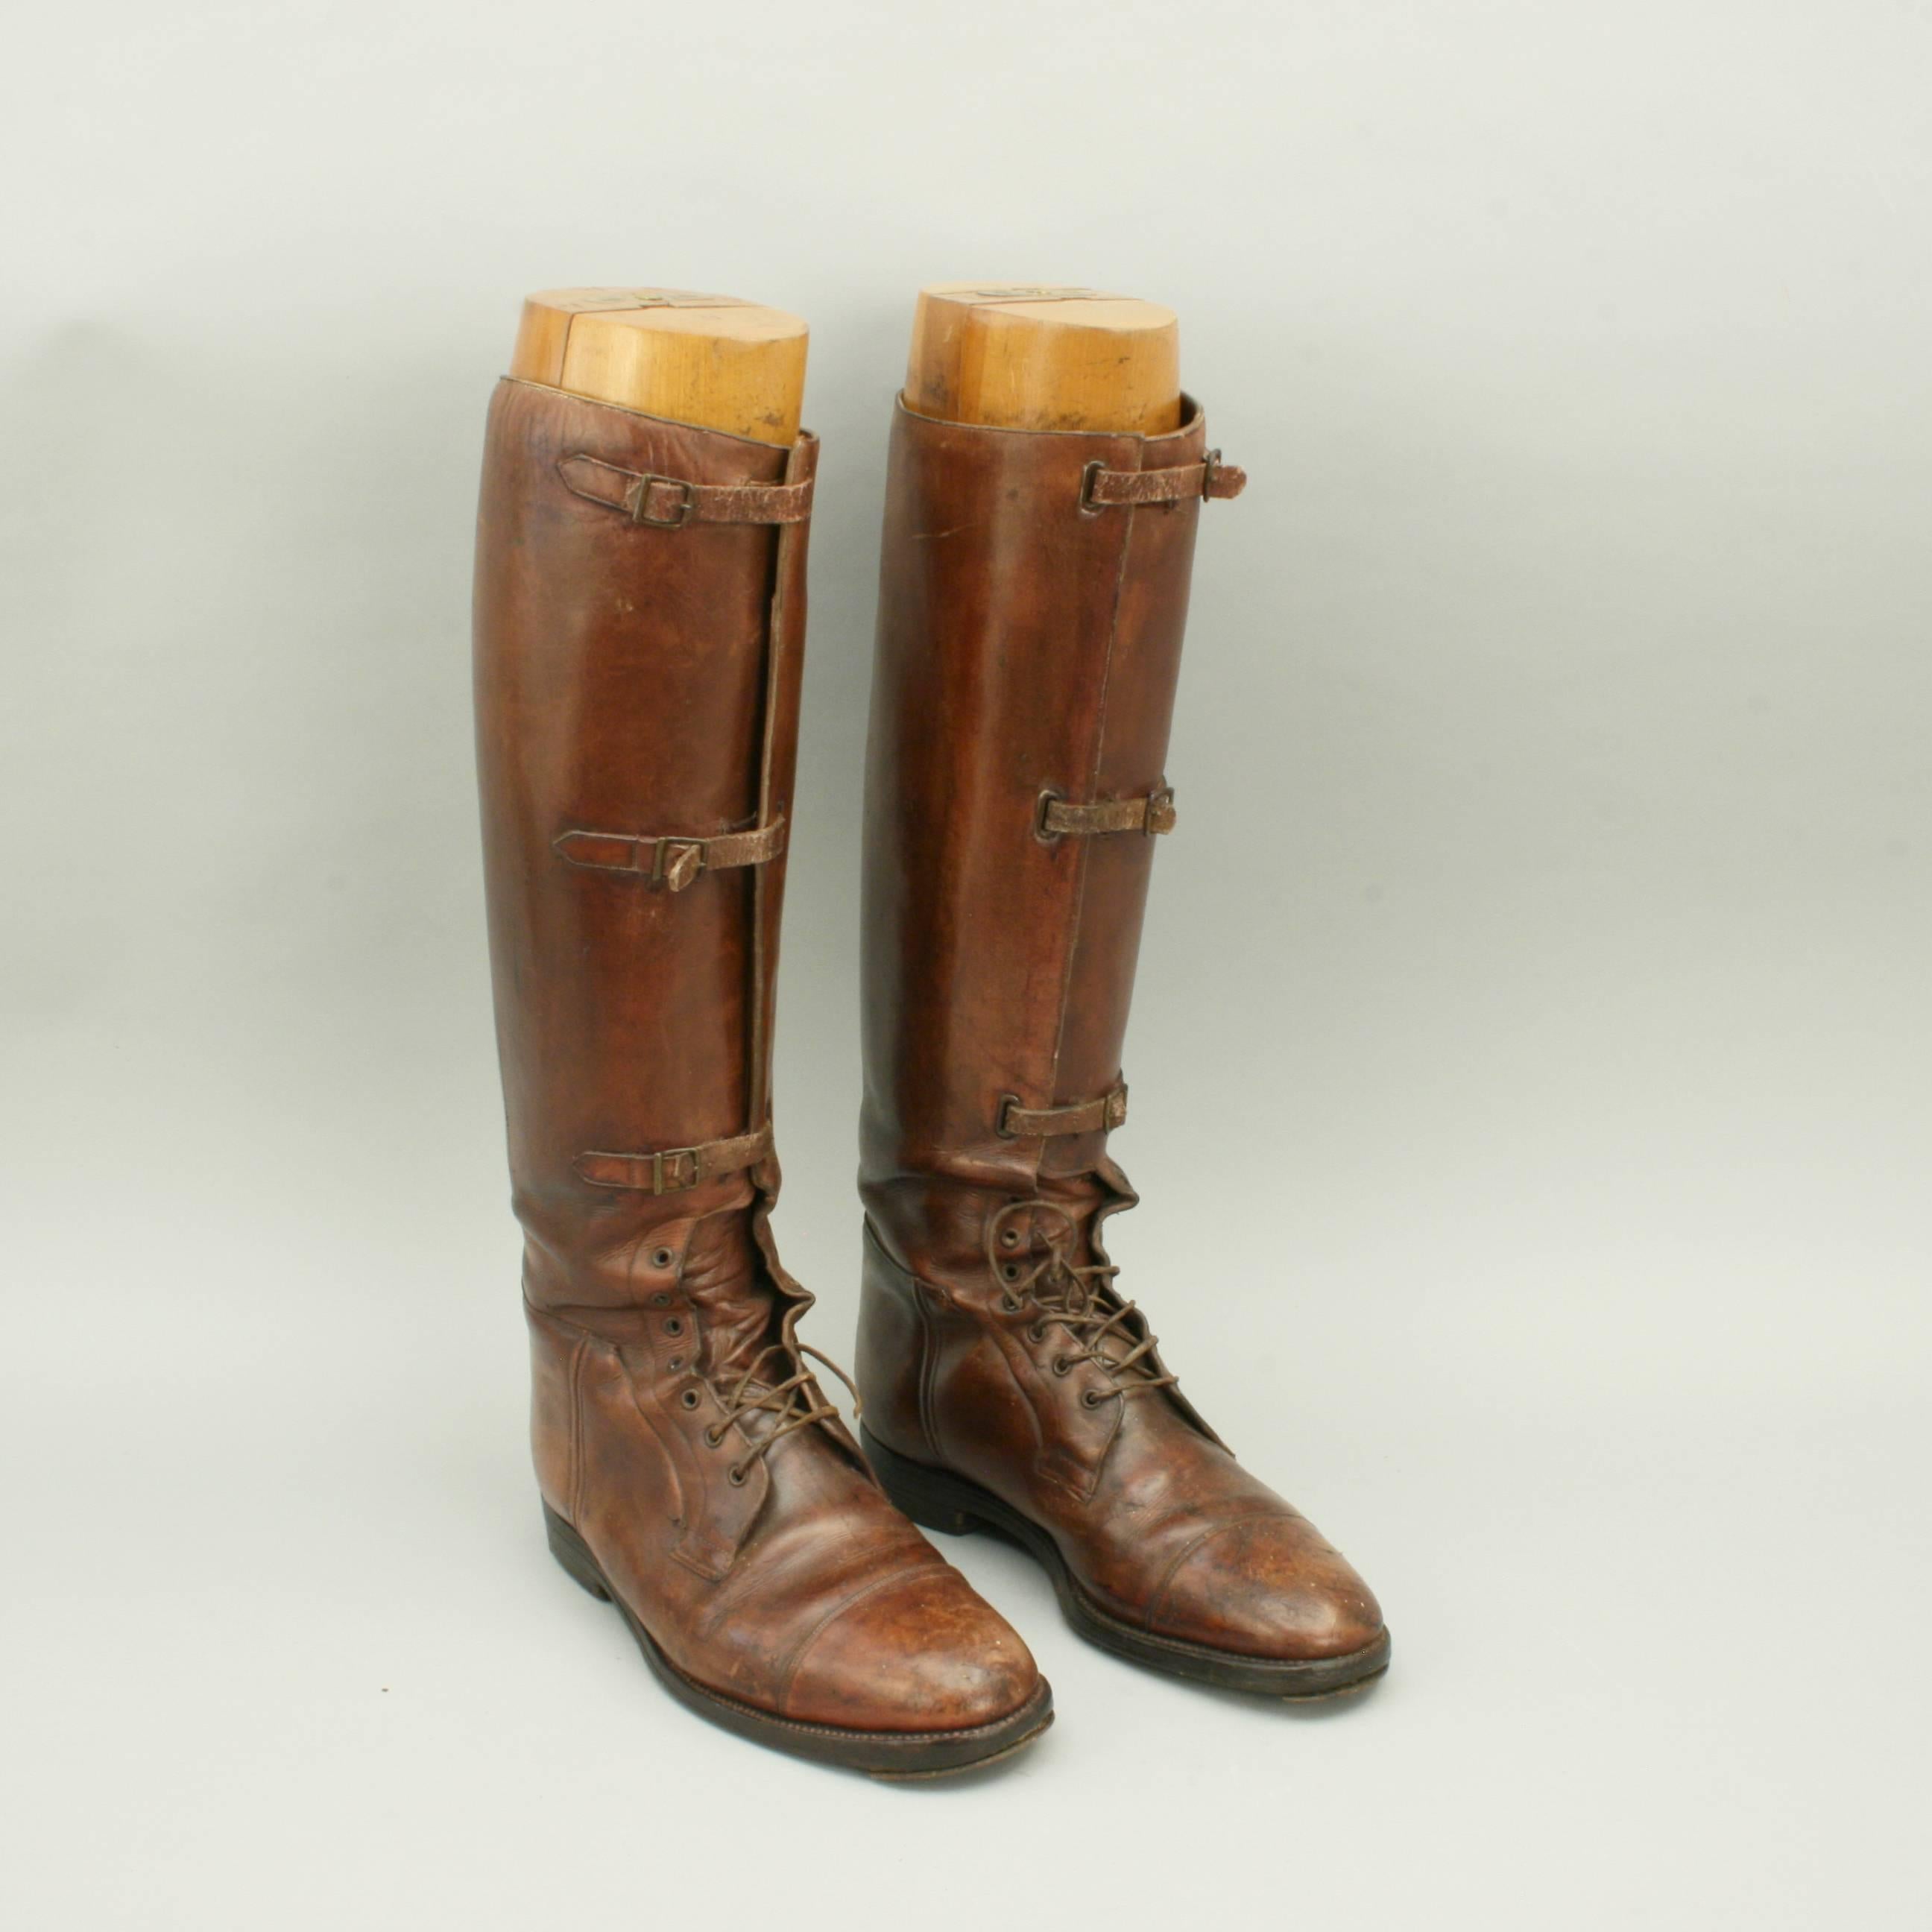 English Brown Leather Field, Riding Boots